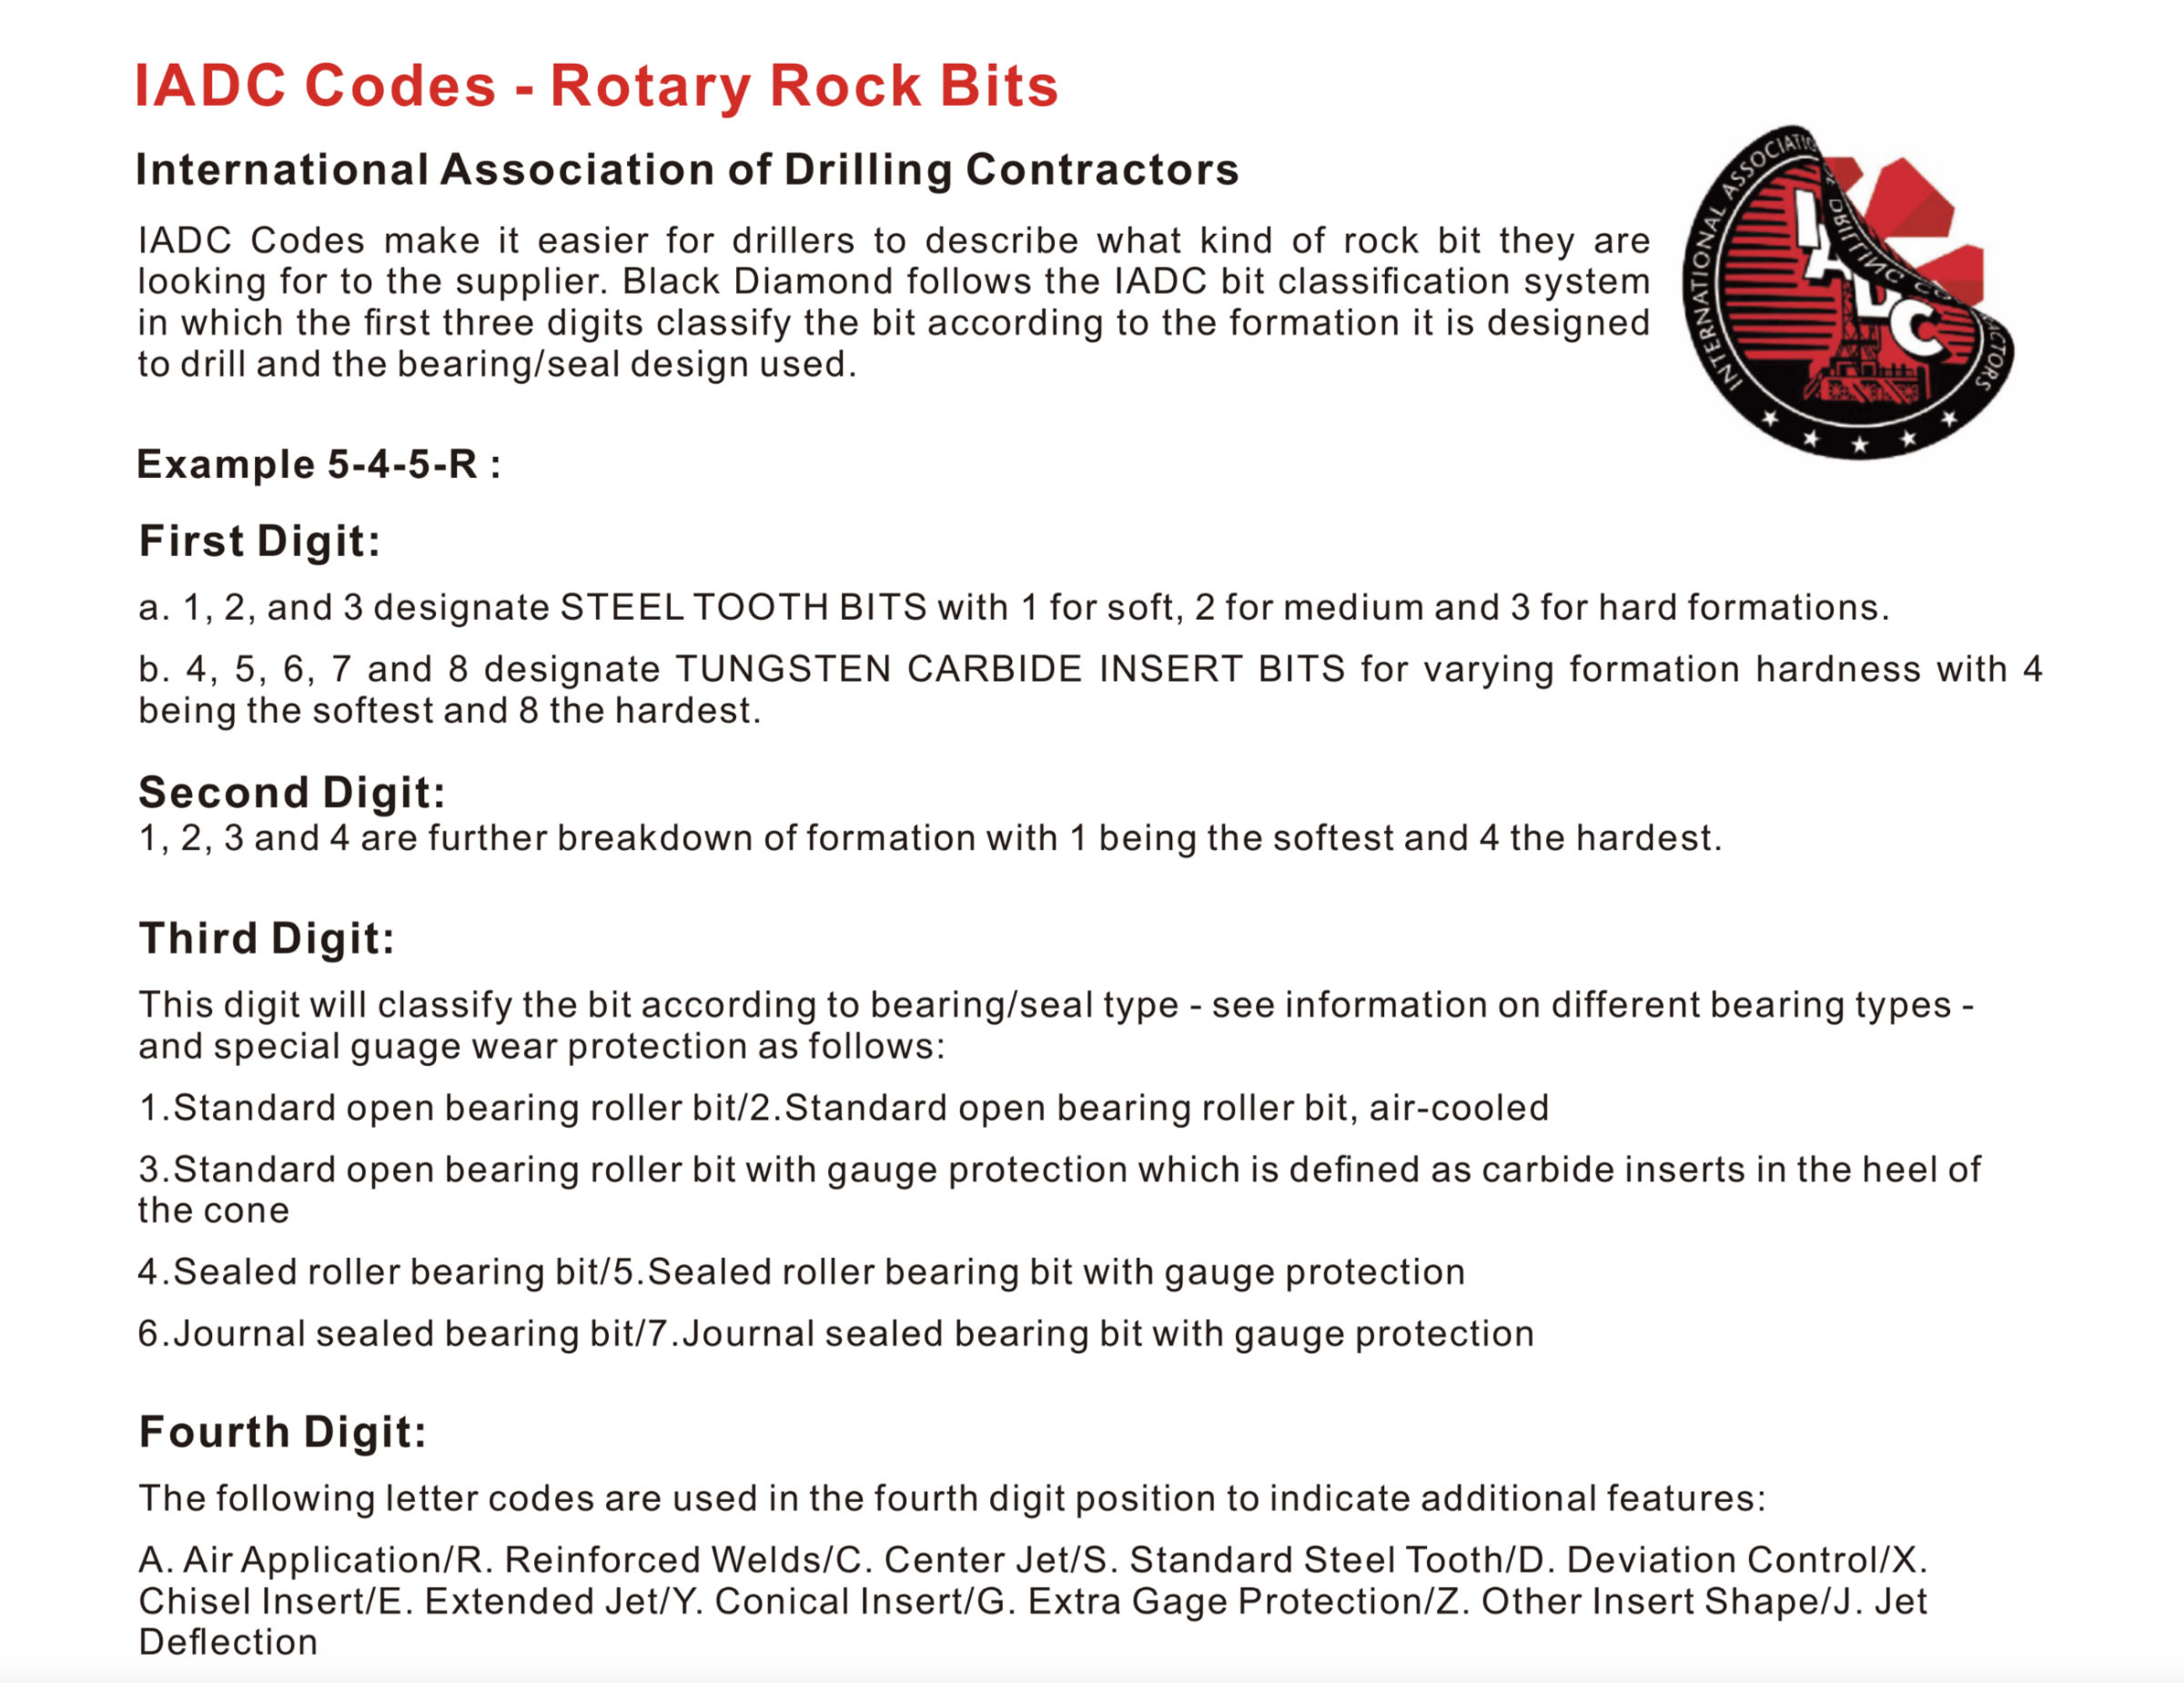 IADC Codes Rotary Rock Bits Digits Guide